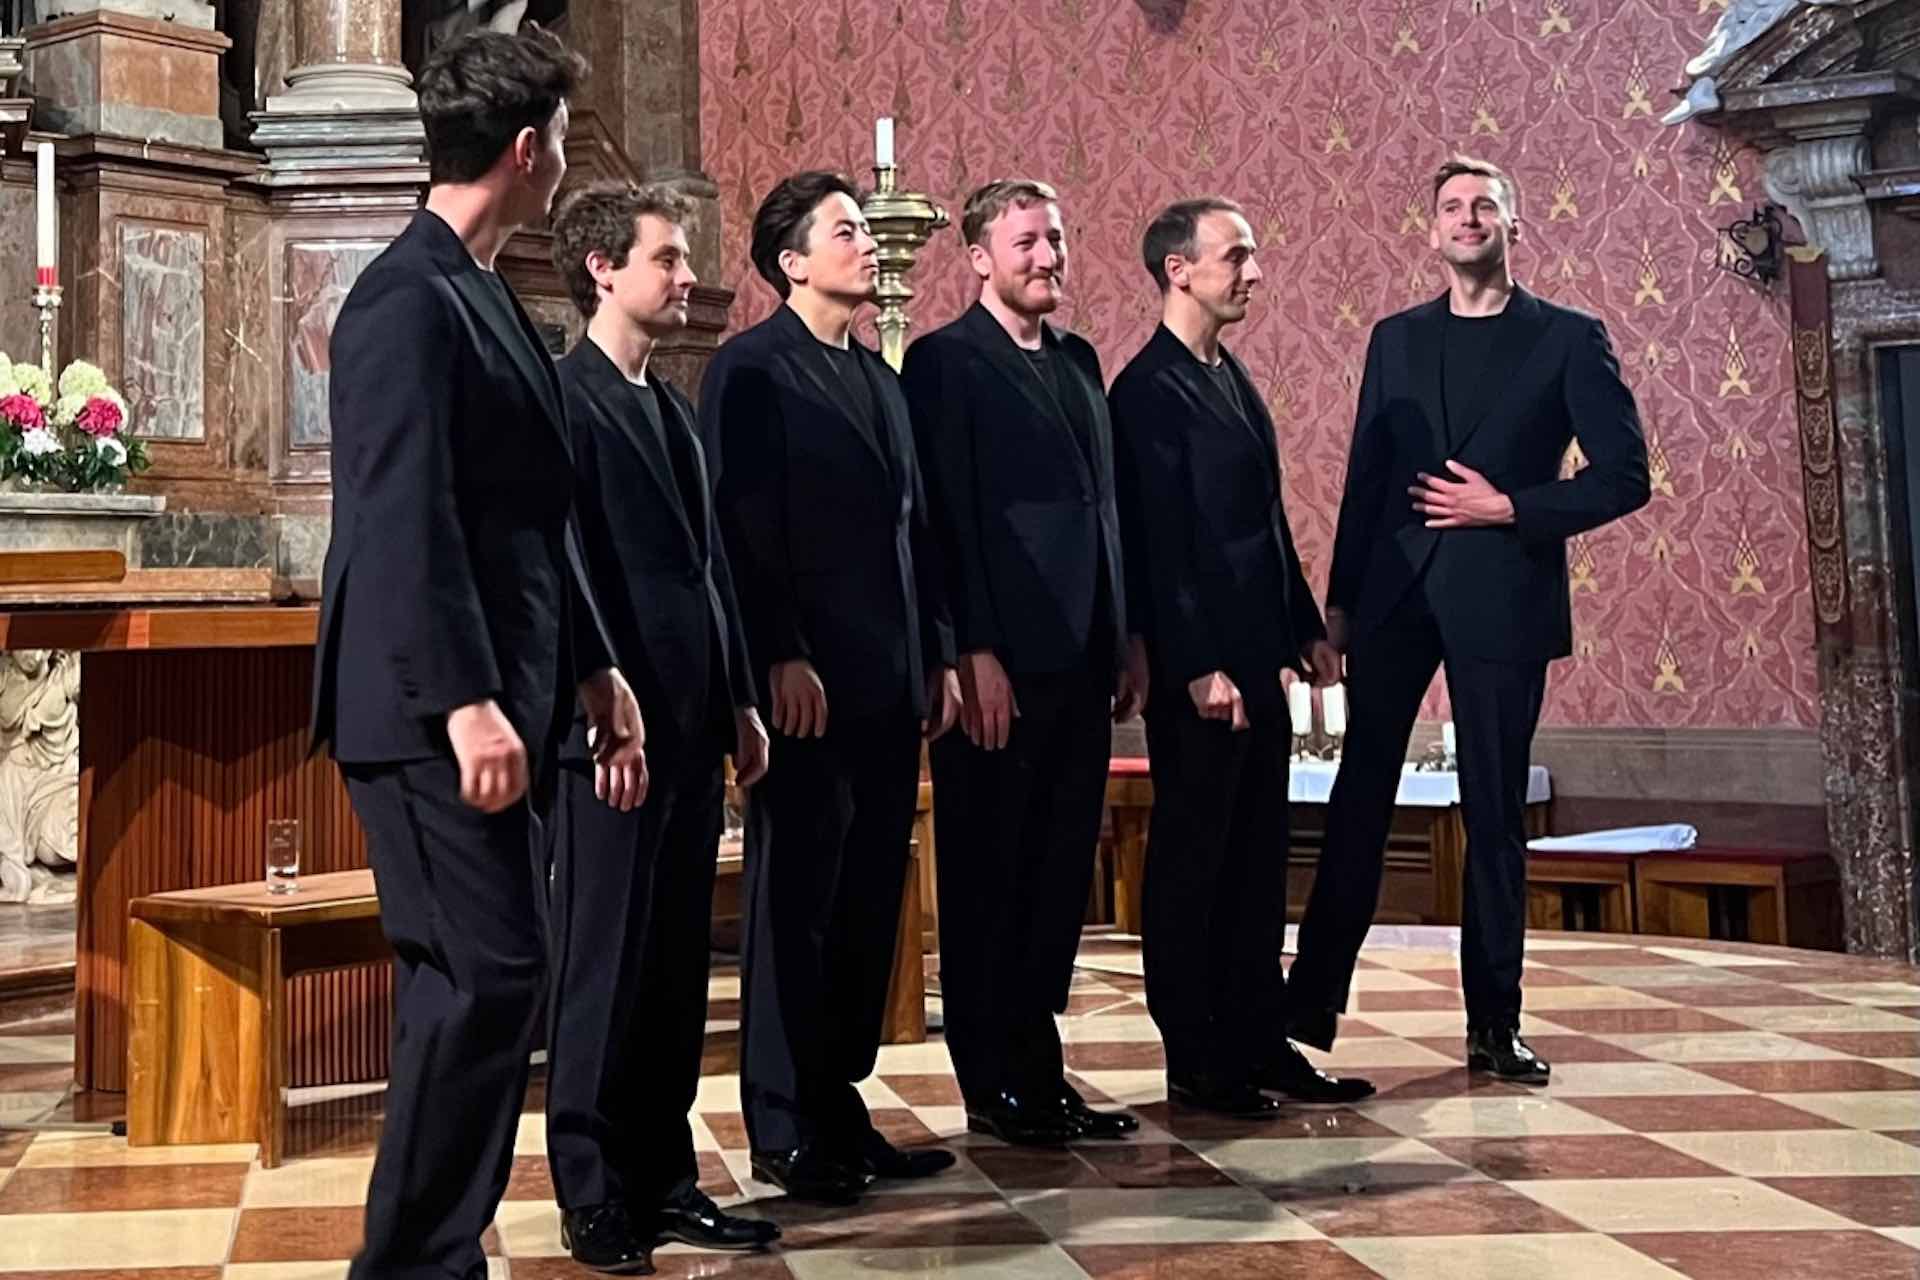 The King's Singers